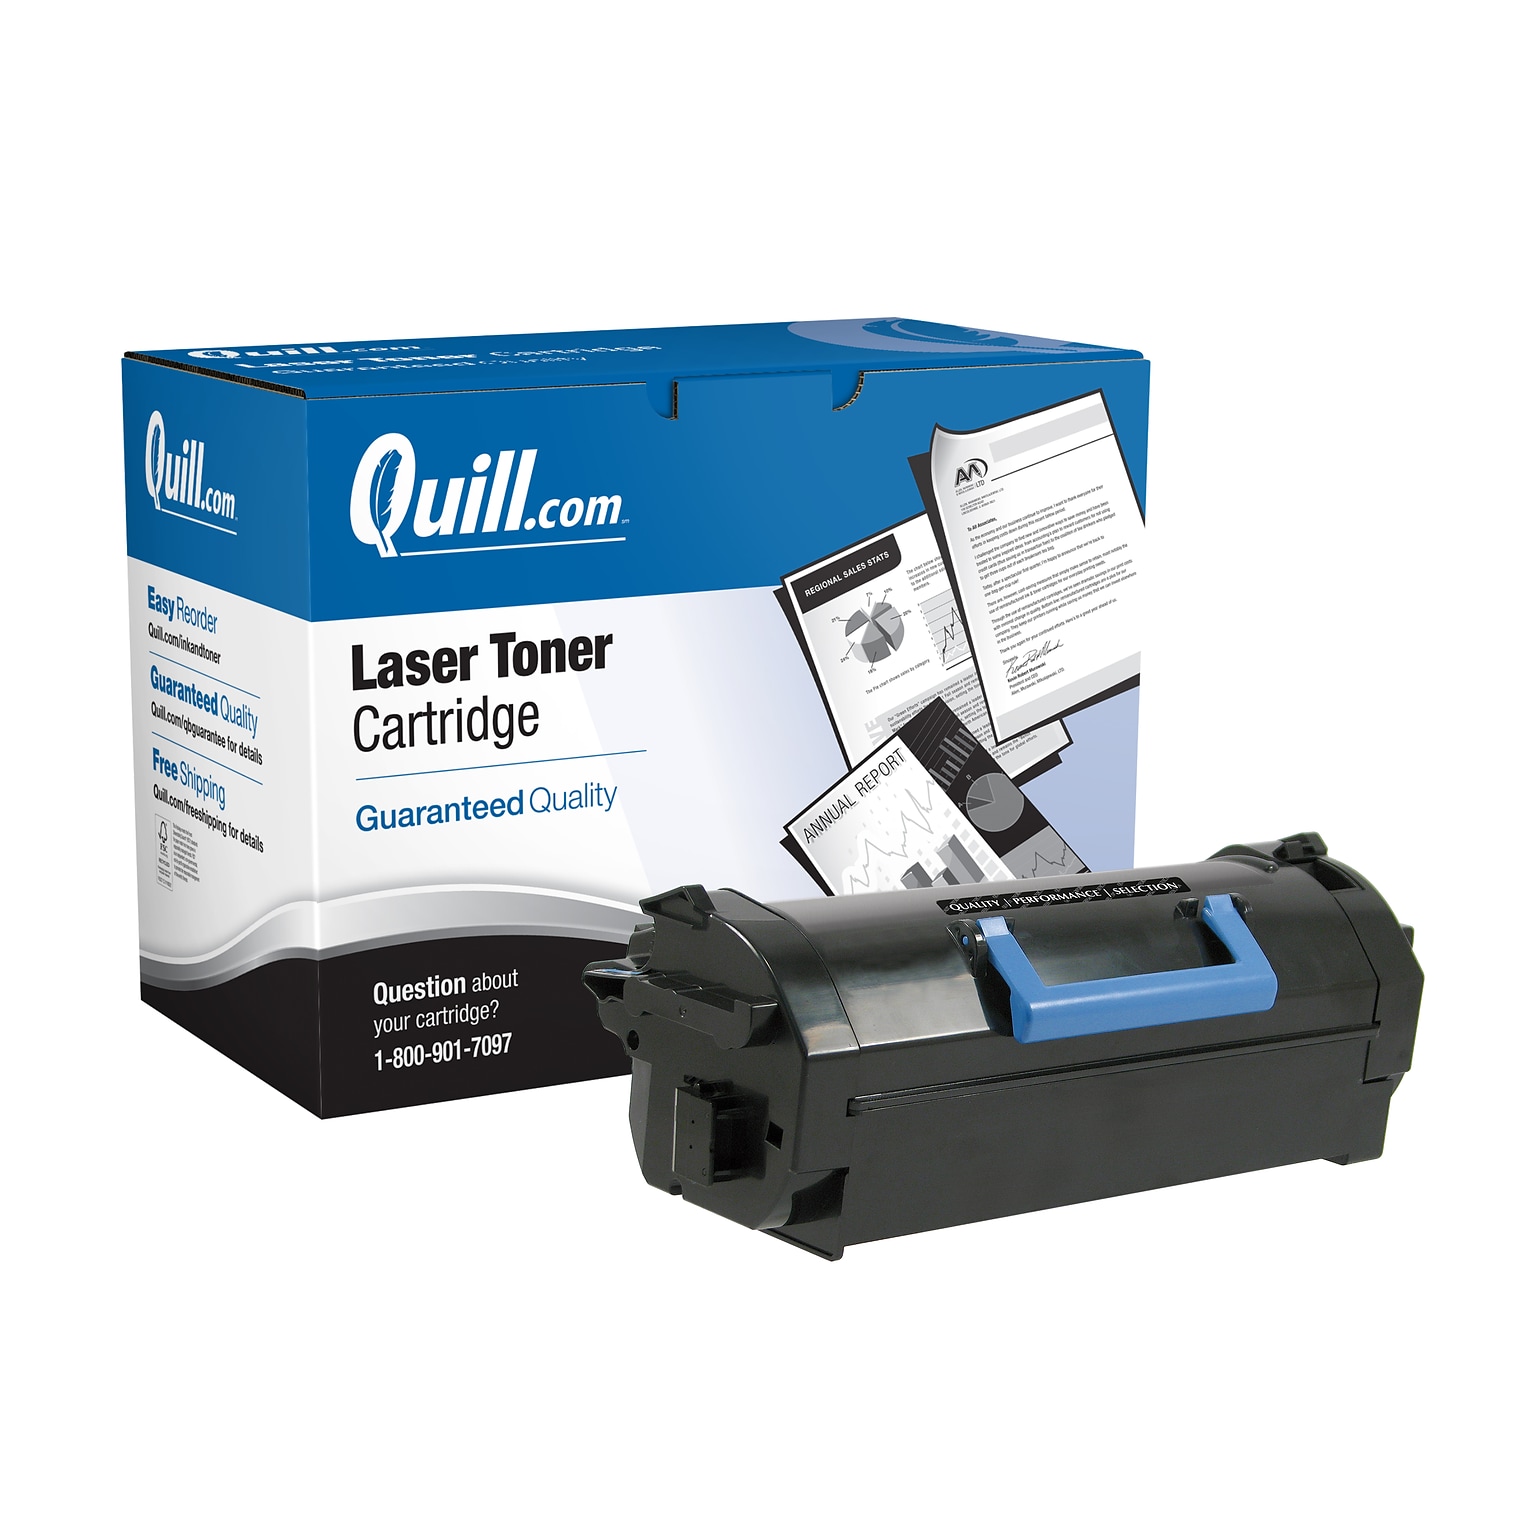 Quill Brand® Remanufactured Black High Yield Toner Cartridge Replacement for Dell B5460/5465 (PG6NR) (Lifetime Warranty)